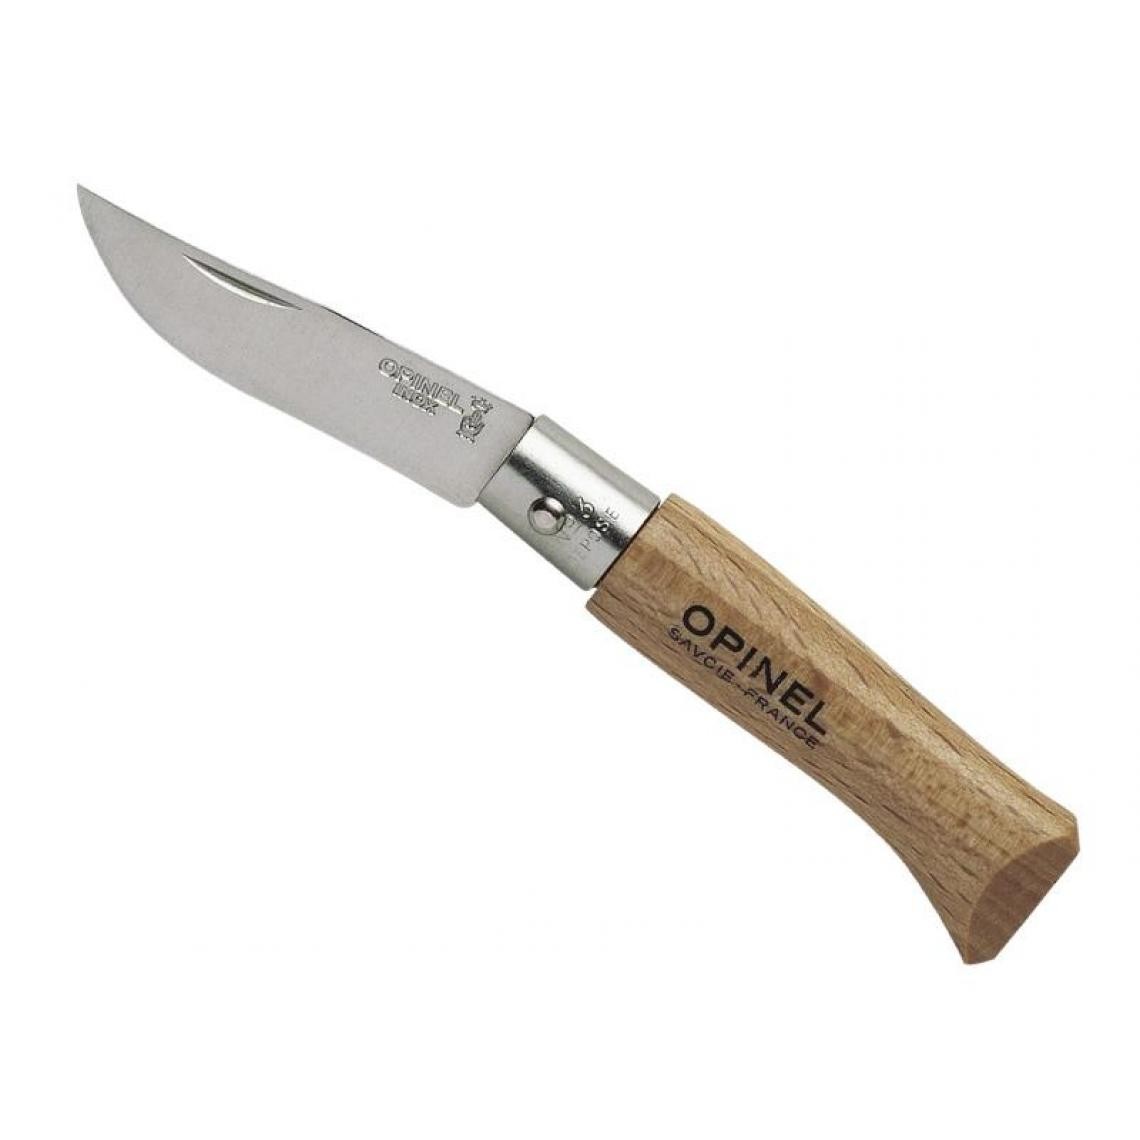 Opinel - OPINEL - 952.03 - BOITE 12 OPINEL N.3 INOX - Outils de coupe